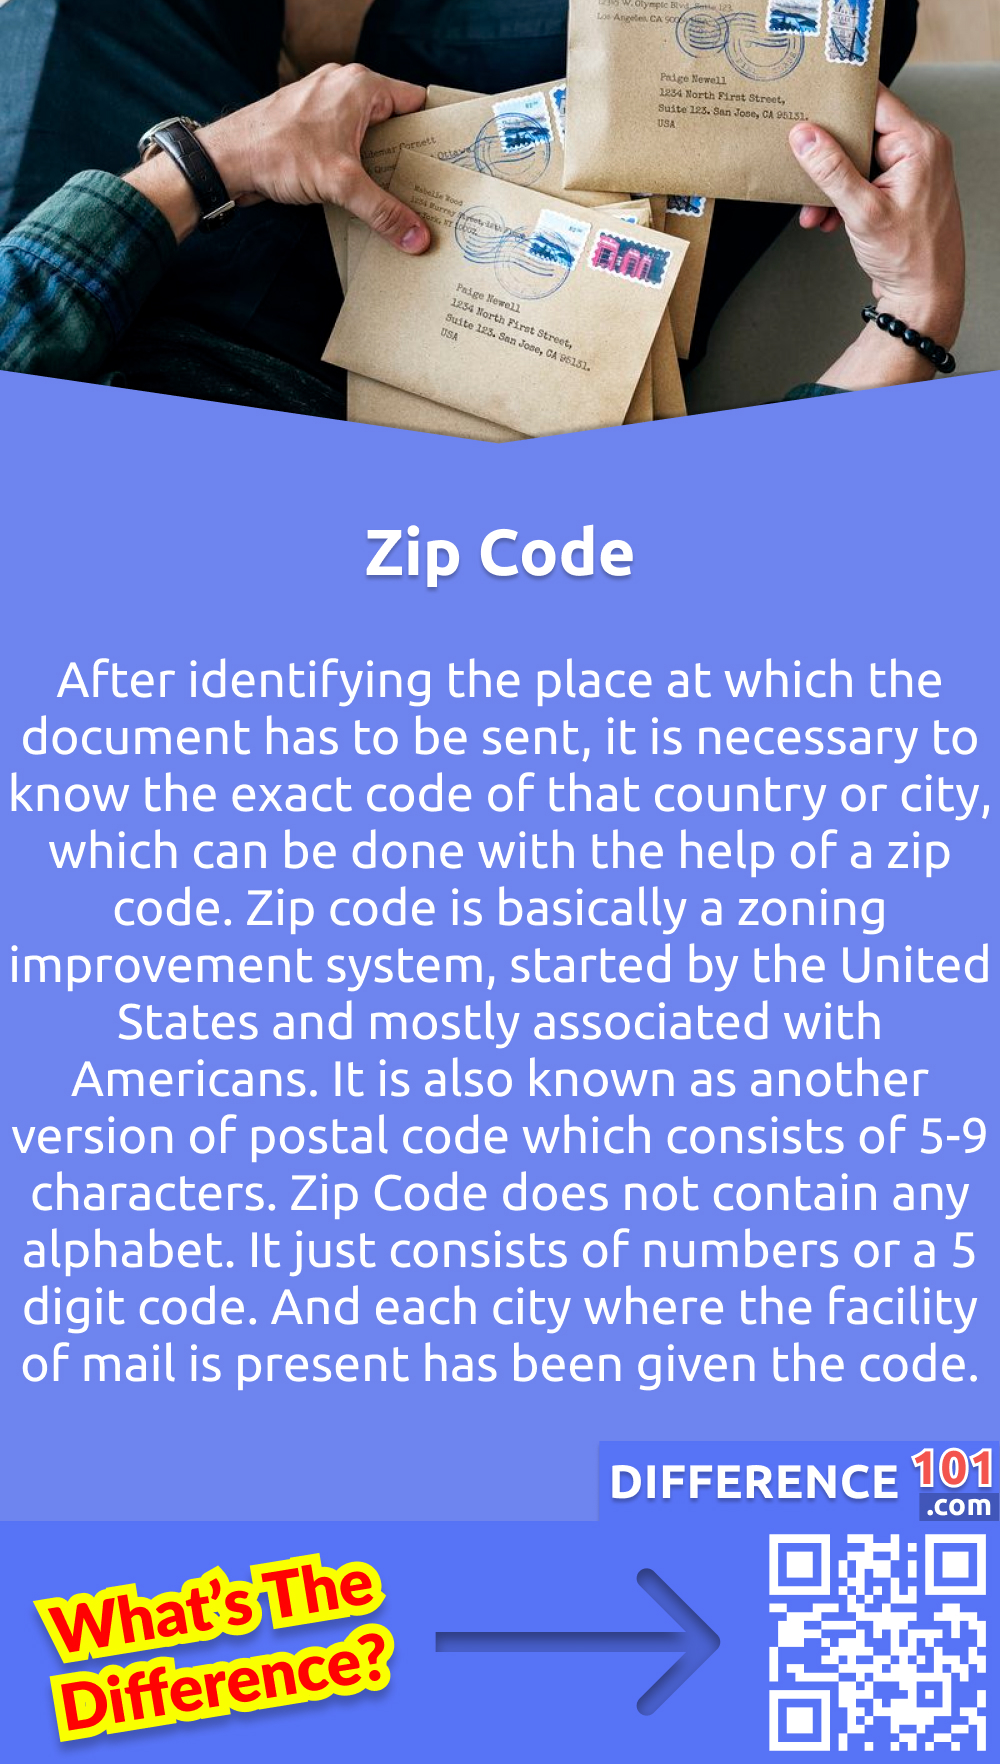 What is Zip Code? After identifying the place at which the document has to be sent, it is necessary to know the exact code of that country or city, which can be done with the help of a zip code. Zip code is basically a zoning improvement system, started by the United States and mostly associated with Americans. It is also known as another version of postal code which consists of 5-9 characters. Zip Code does not contain any alphabet. It just consists of numbers or a 5 digit code. And each city where the facility of mail is present has been given the code.